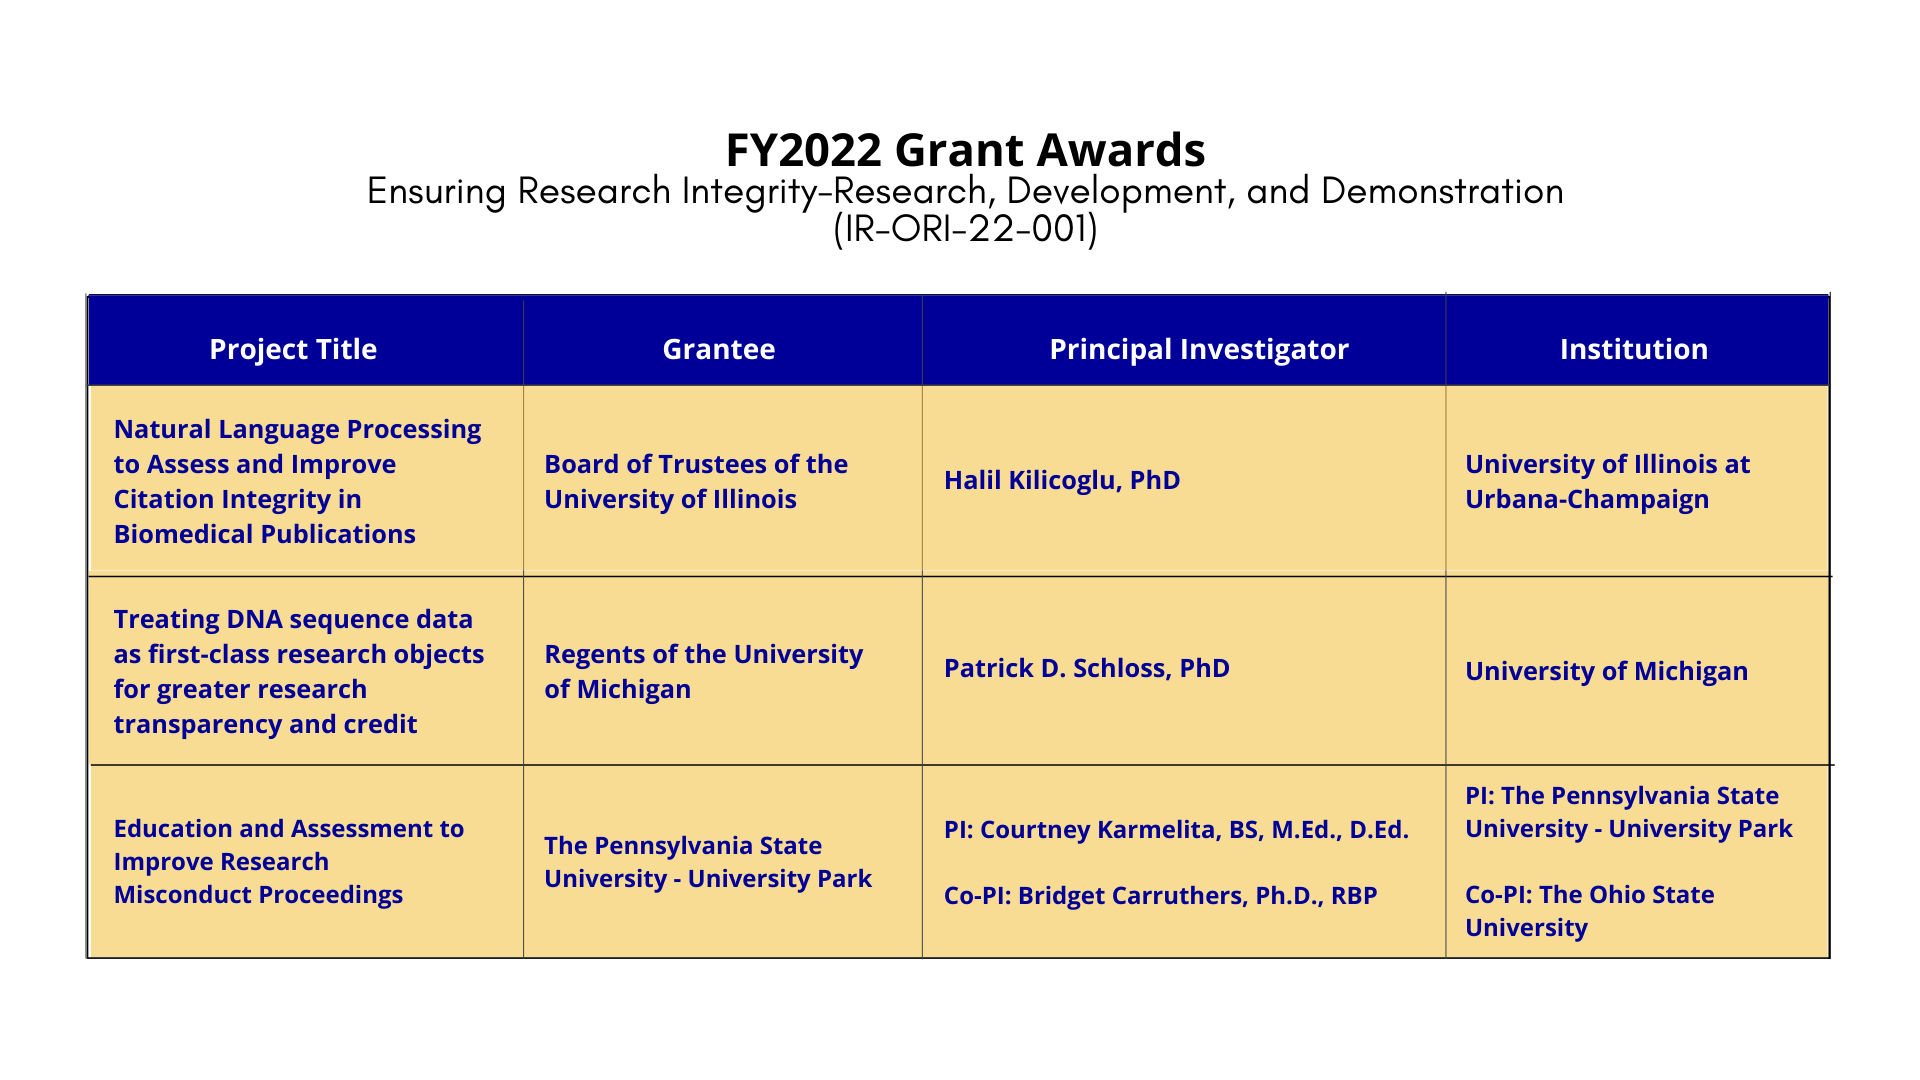 This is a table showing the name of each project, the name of each grantee, the name of each Principle Investigator on the project, and the name of each institution associated with the funded project.